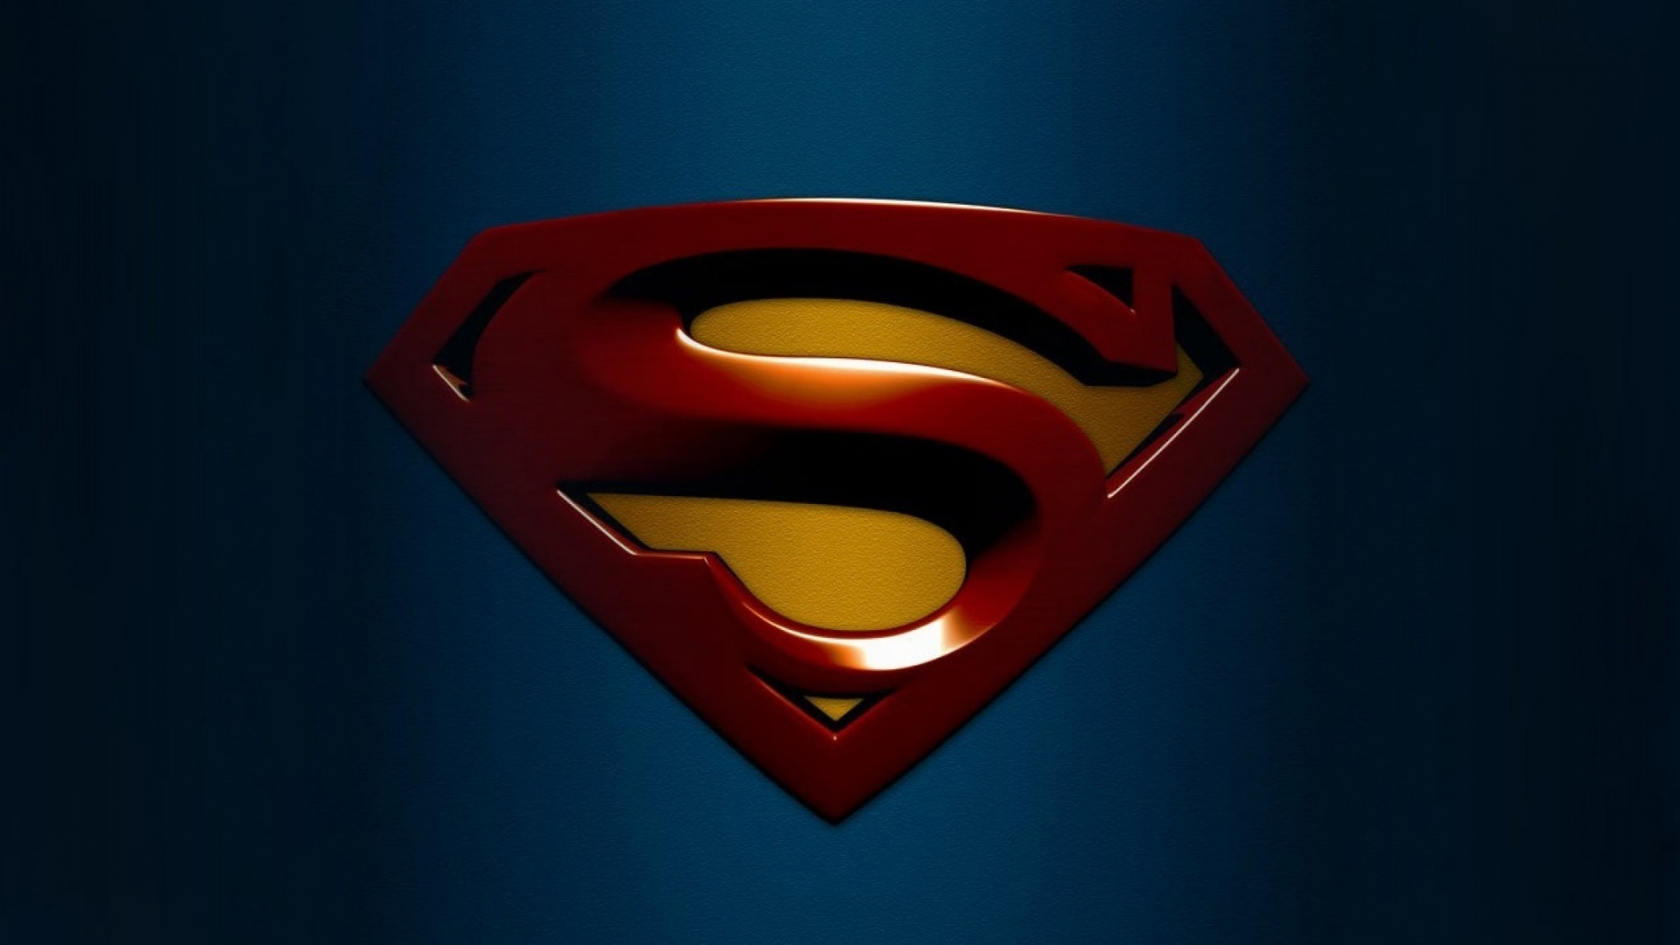 Just Superman for 1680 x 945 HDTV resolution